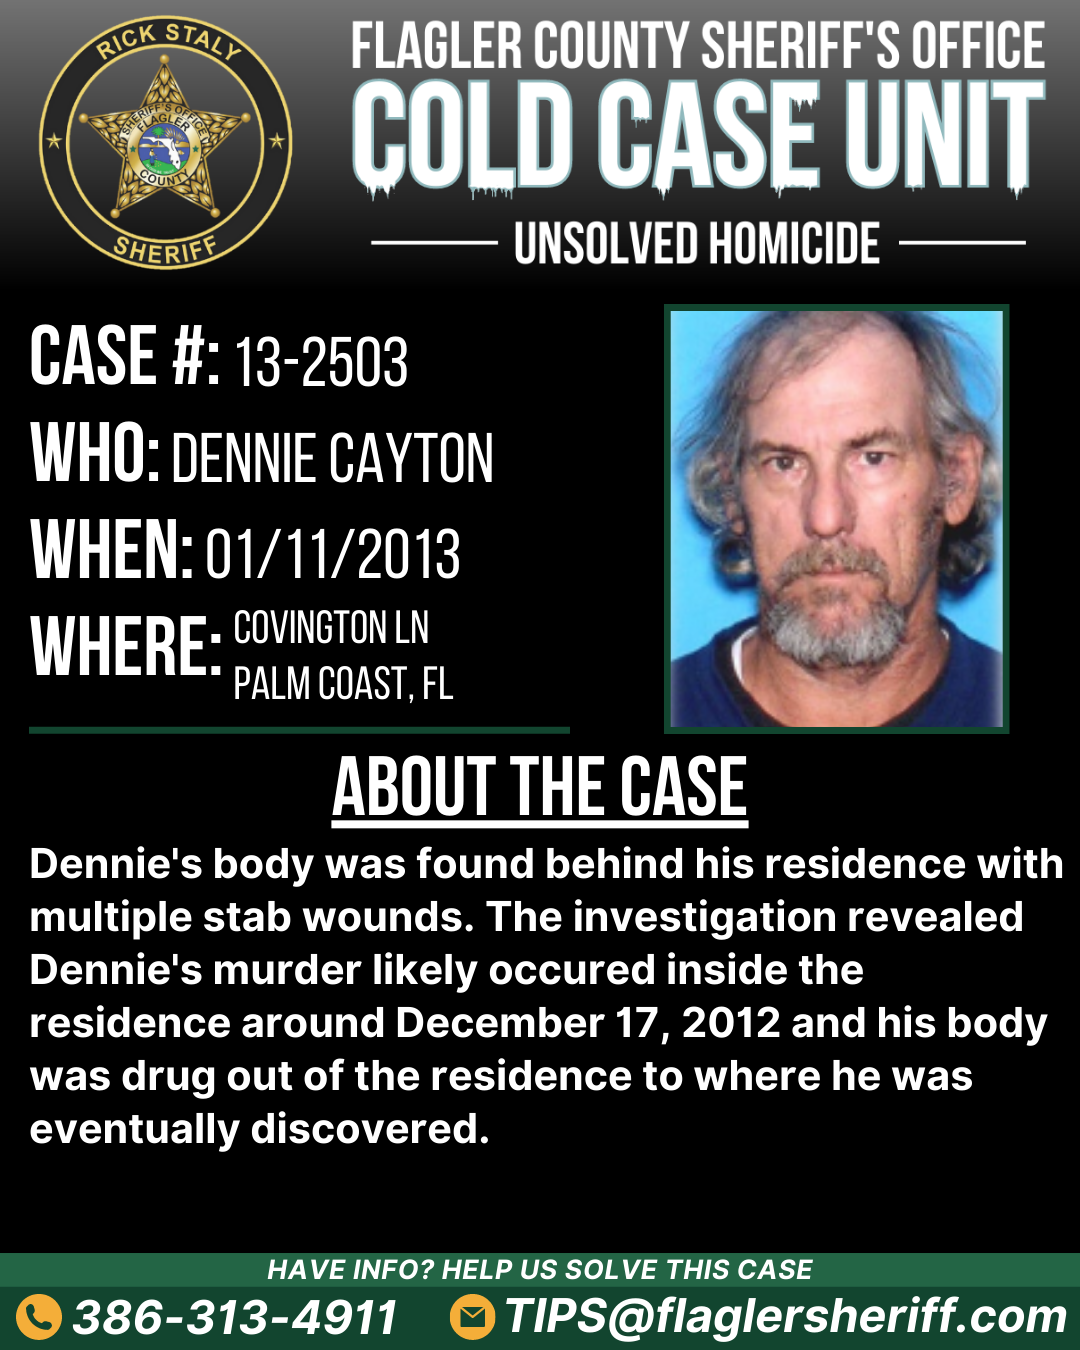 Unsolved homicide. Case #13-2503. Who: Dennie Cayton. When: 01/11/2013. Where: Covington Lane (Palm Coast, FL). About the case: Dennie's body was found behind his residence with multiple stab wounds. The investigation revealed Dennie's murder likely occured inside the residence around December 17, 2012 and his body was drug out of the residence to where he was eventually discovered.